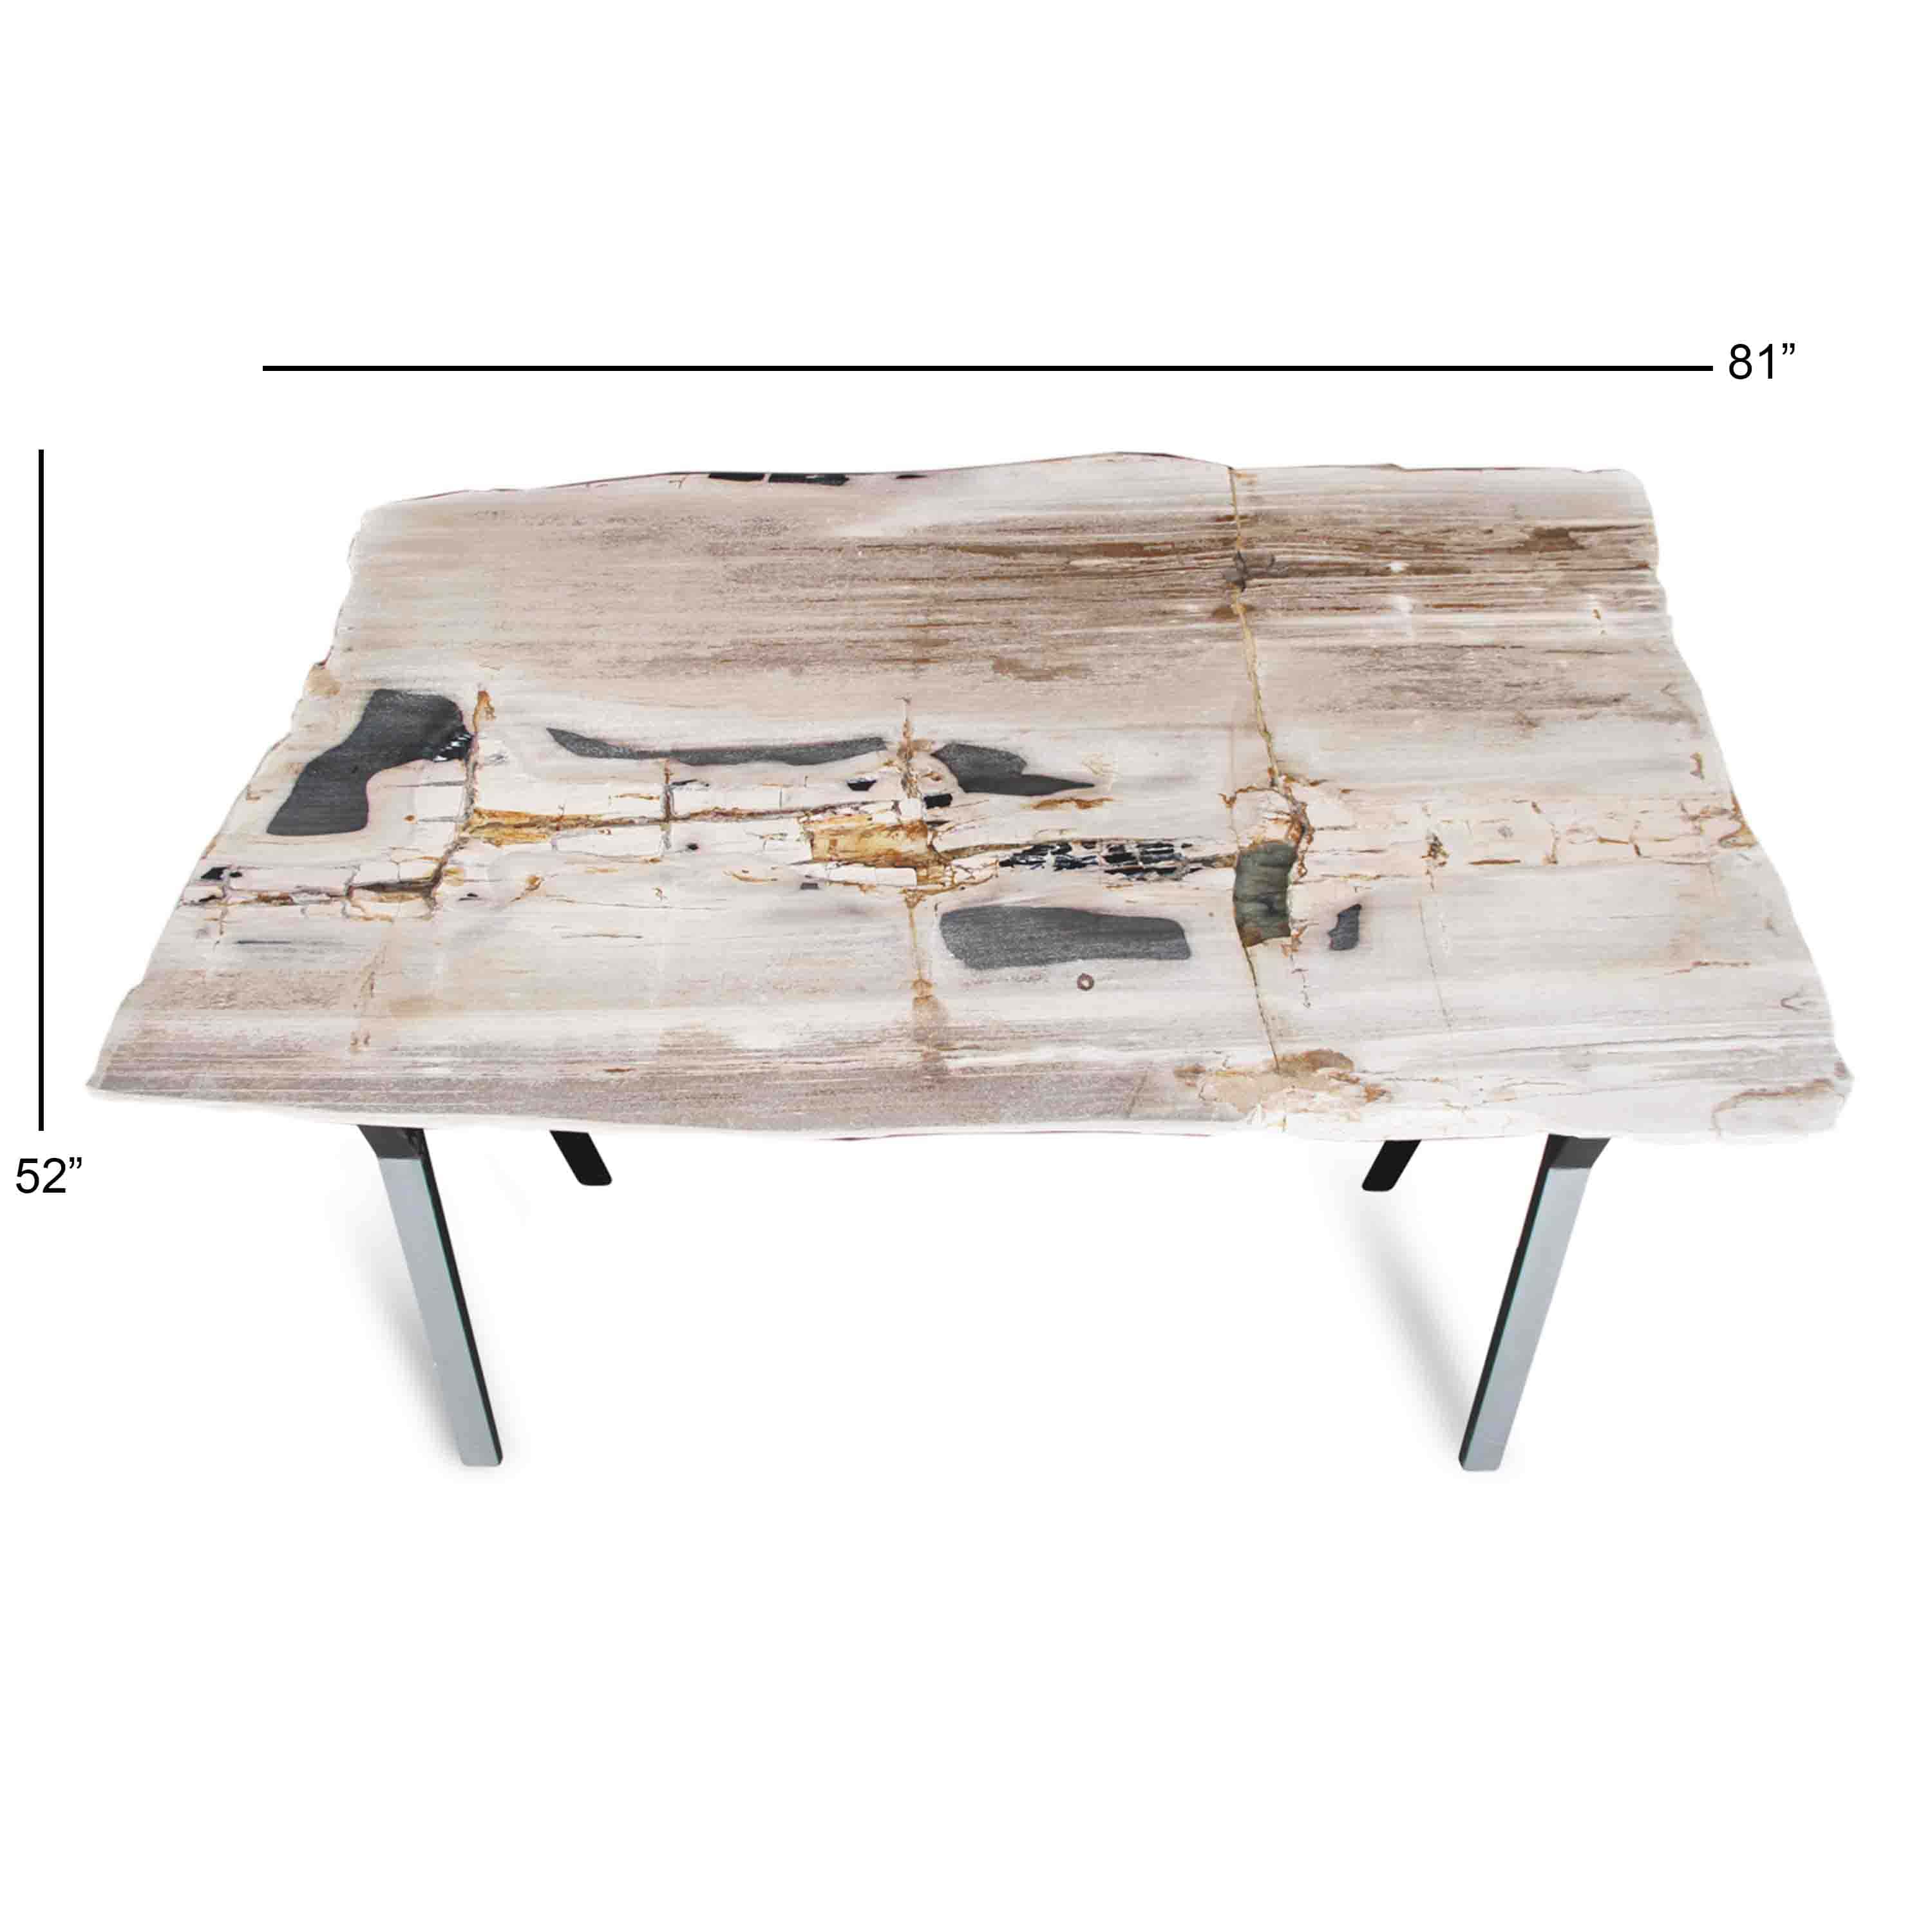 Kalifano Petrified Wood Natural Polished Petrified Wood Rectangular Table Top from Indonesia - 81" / 750 lbs PWR27200.001